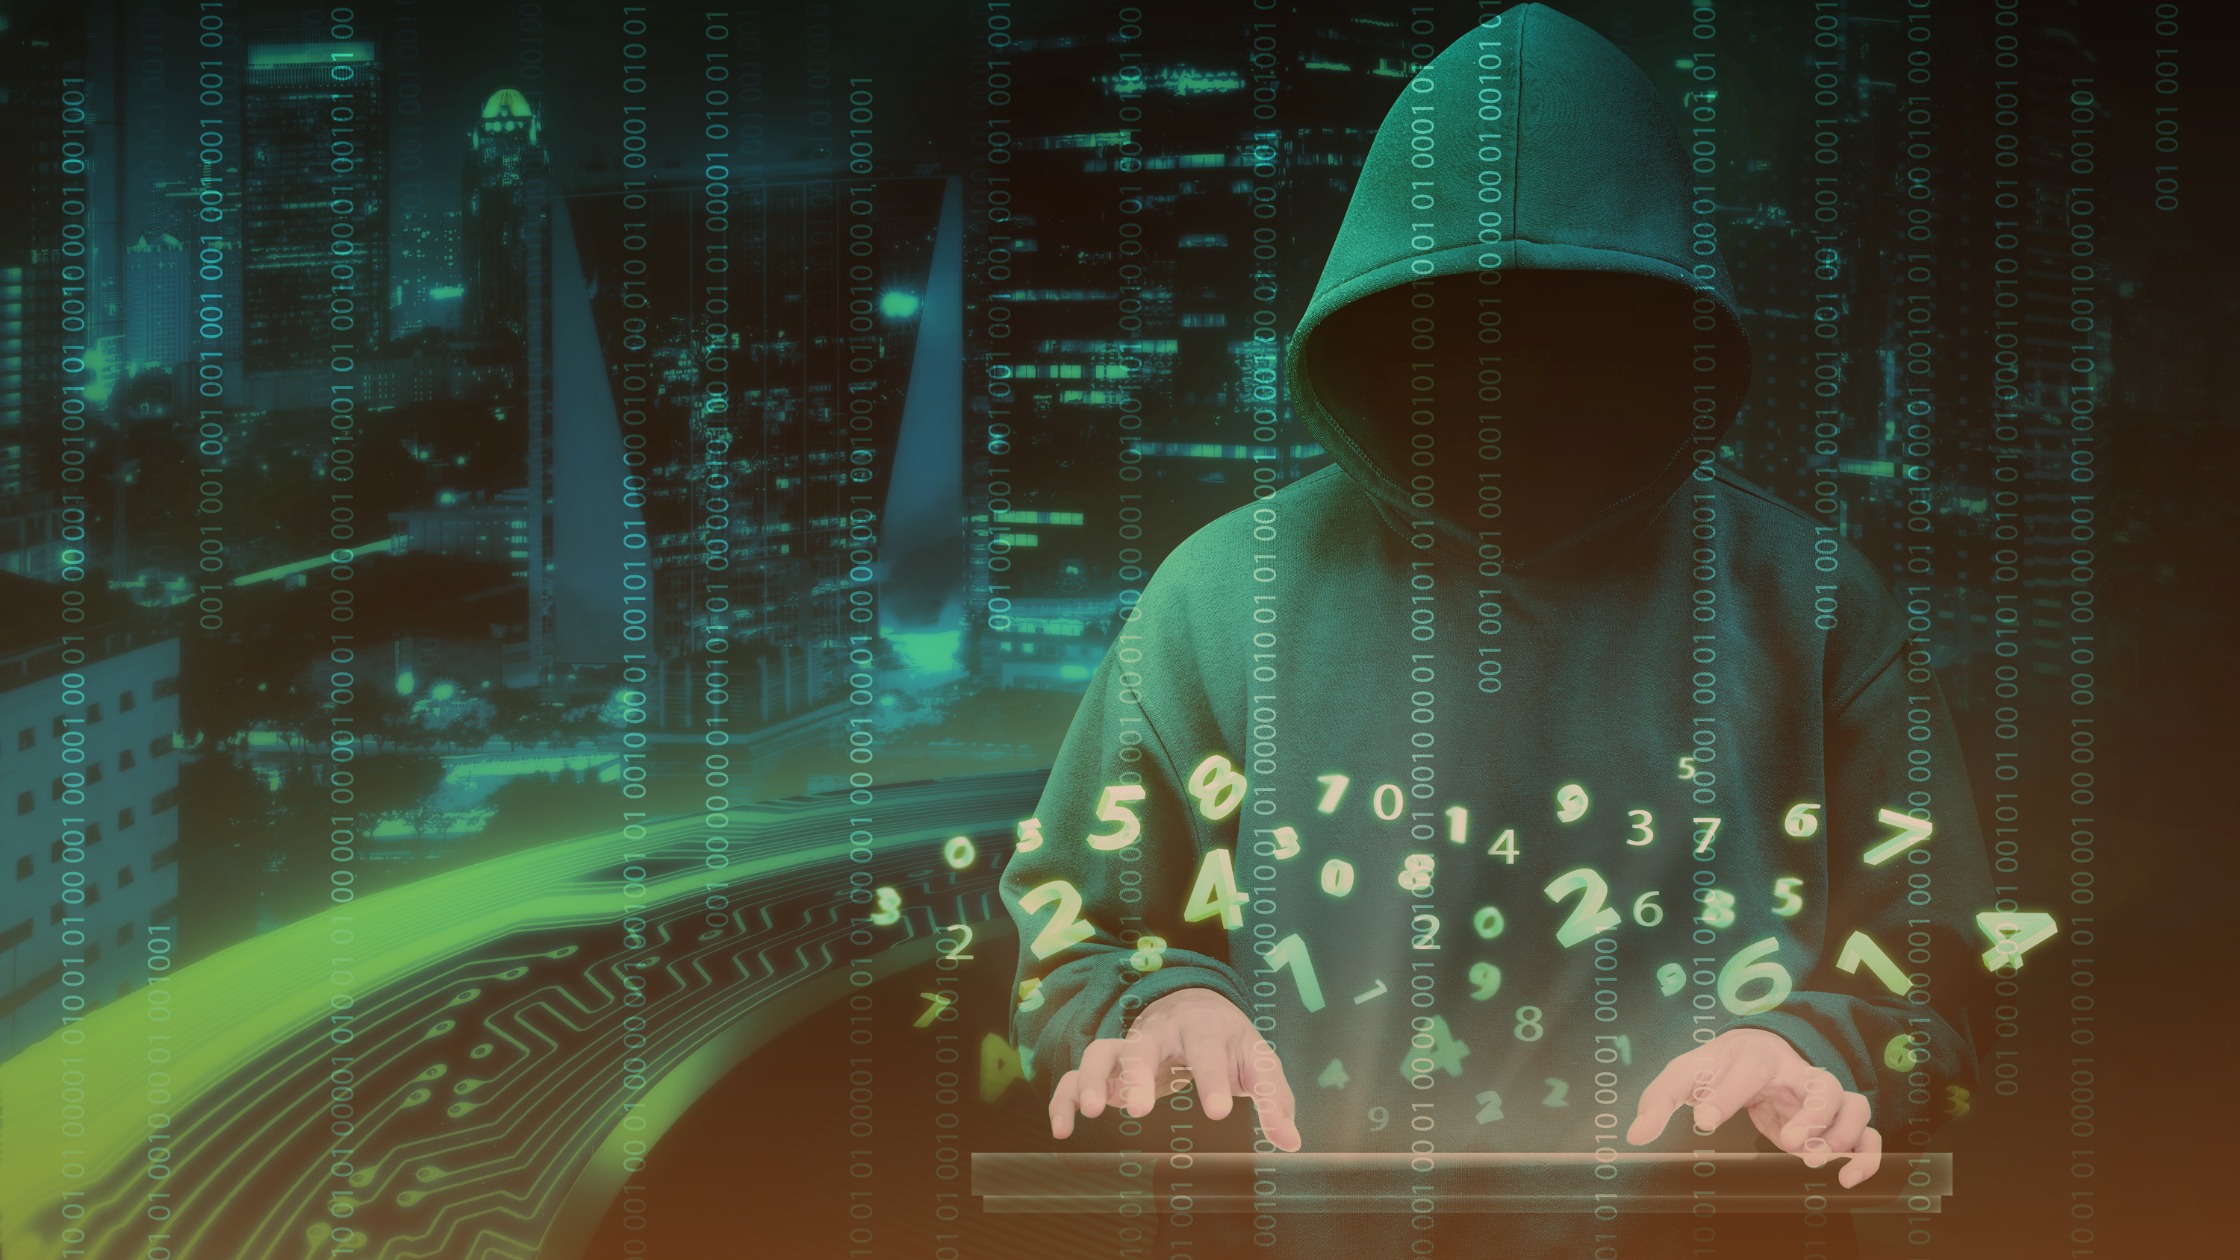 Mysterious figure in a hood typing on a keyboard with glowing digital numbers and circuit board traces overlaid, set against a backdrop of a night cityscape.